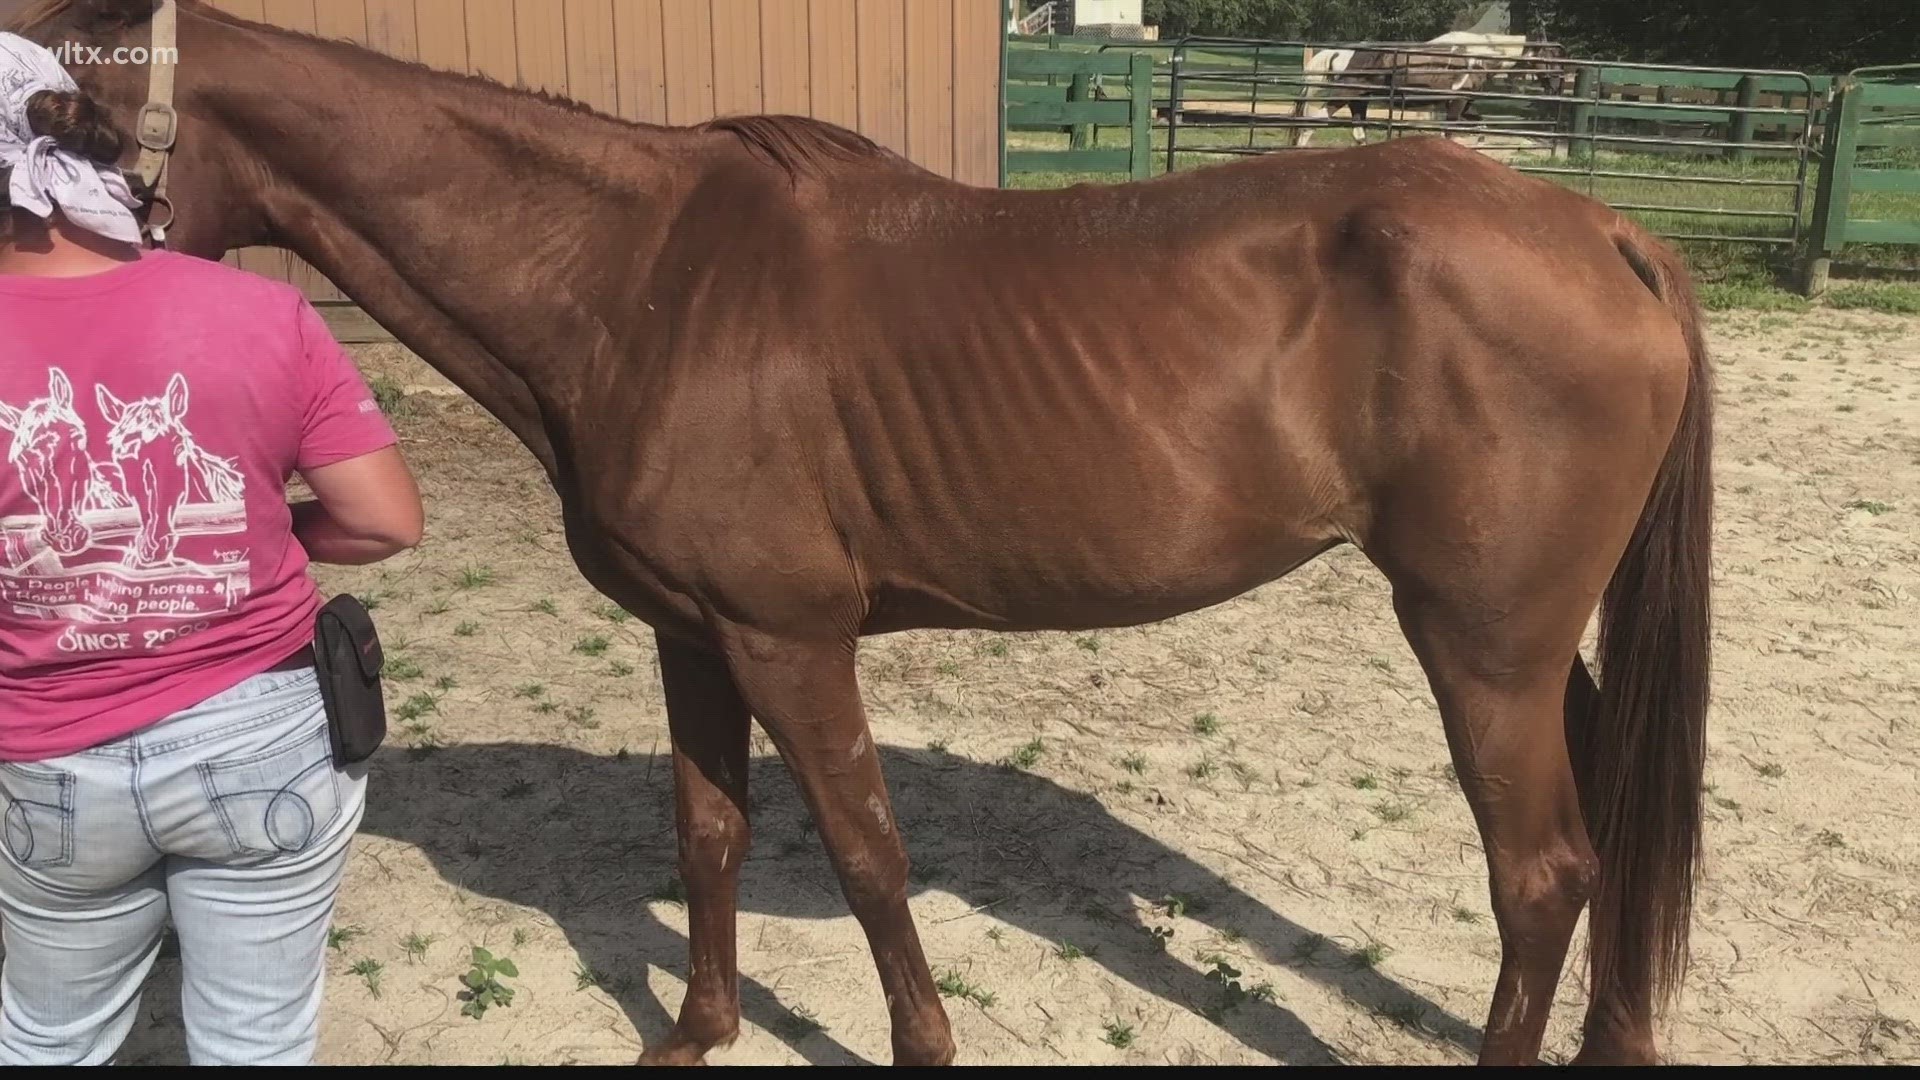 The Richland County Sheriff's Department has arrested a man accused of the ill-treatment of horses.